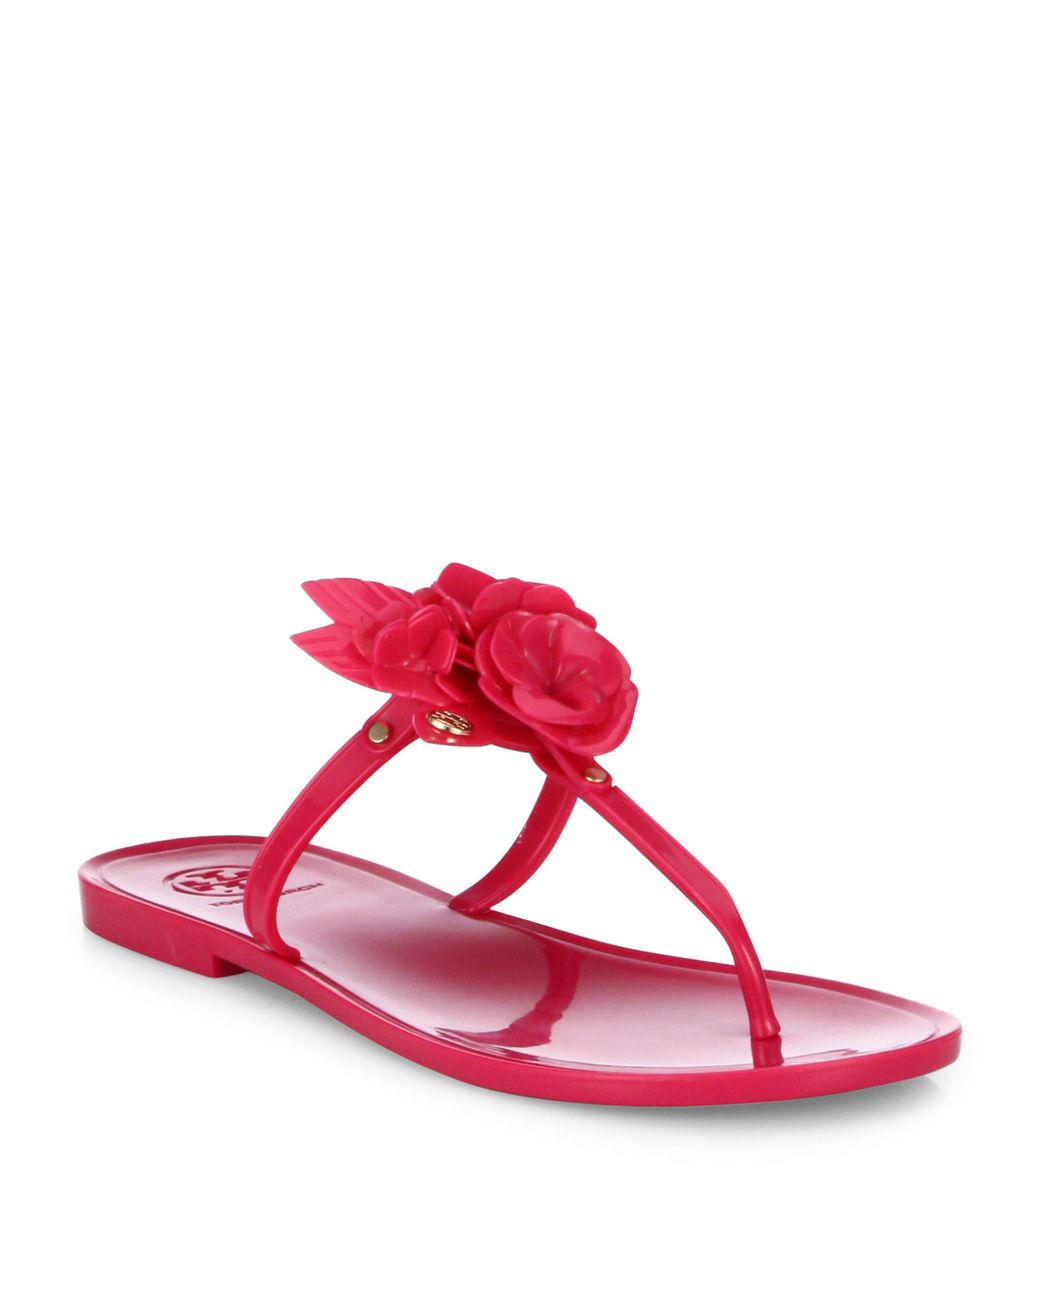 Tory Burch Blossom Jelly Thong Sandals in Pink | Lyst